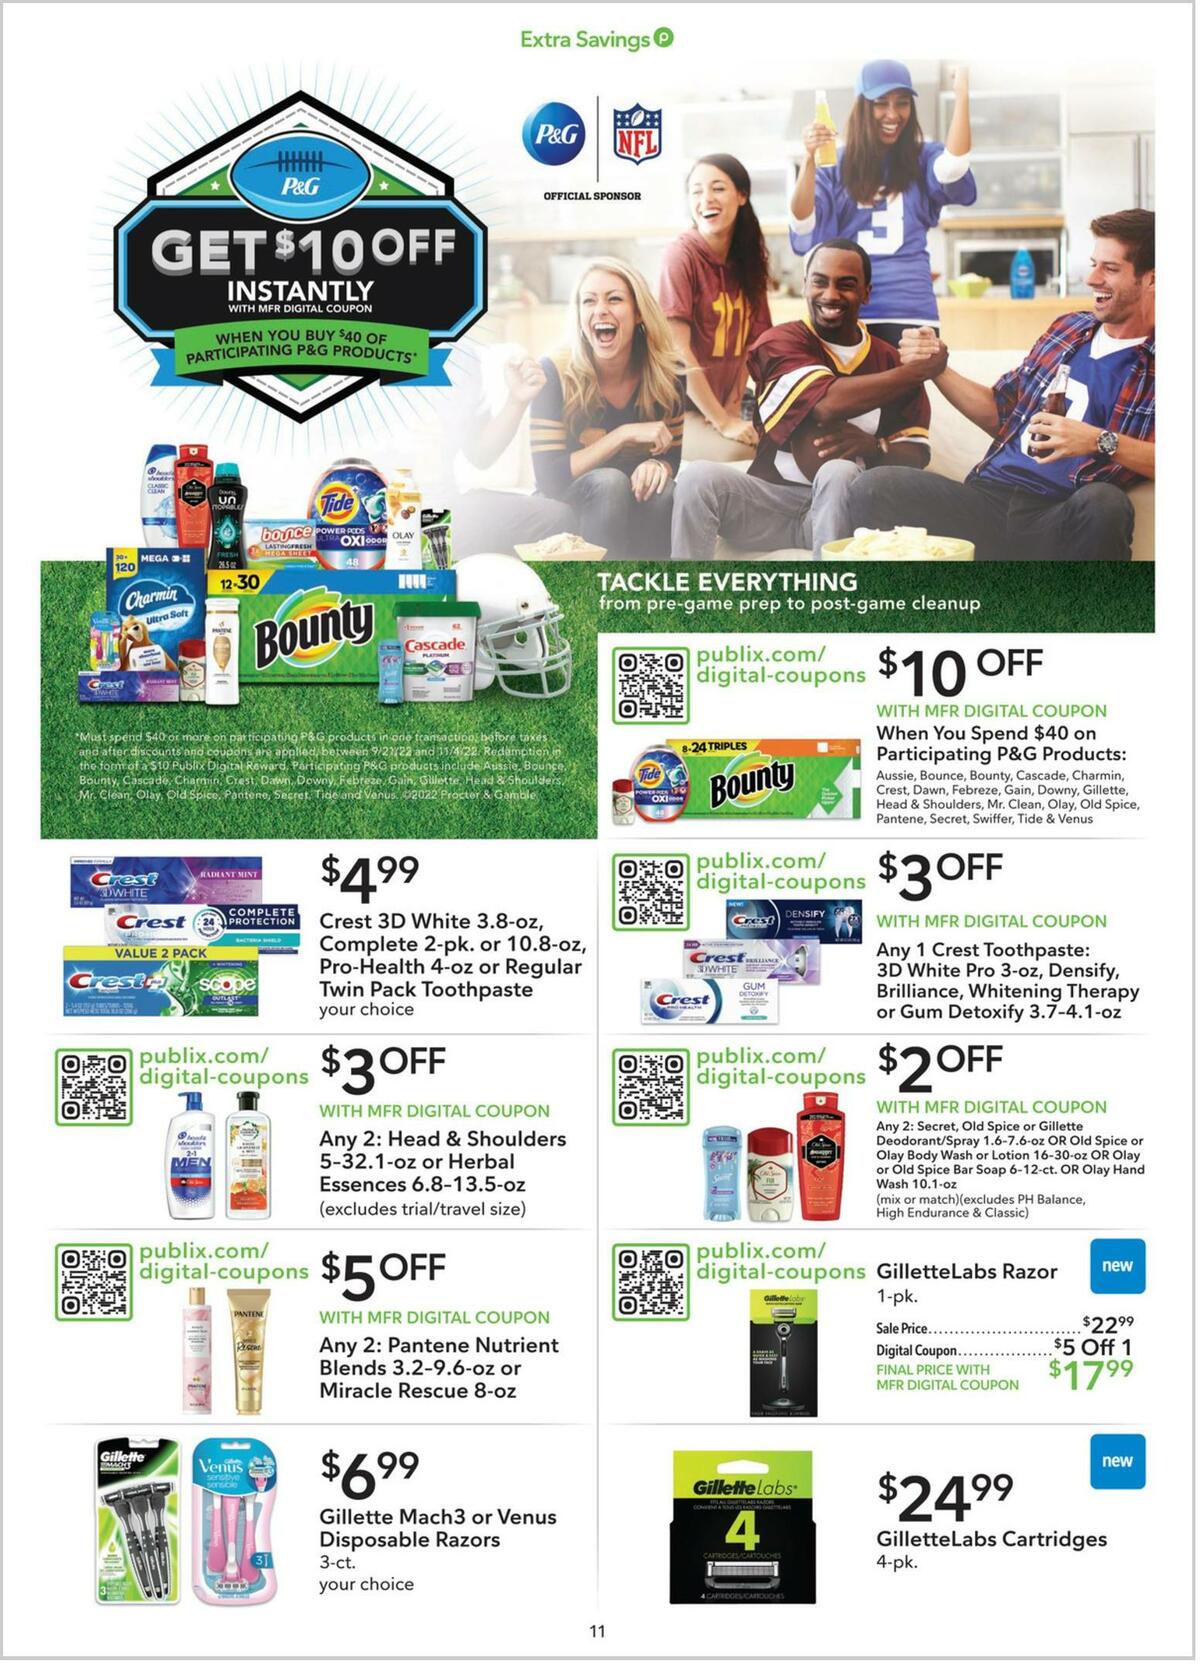 Publix Extra Savings Weekly Ad from September 24